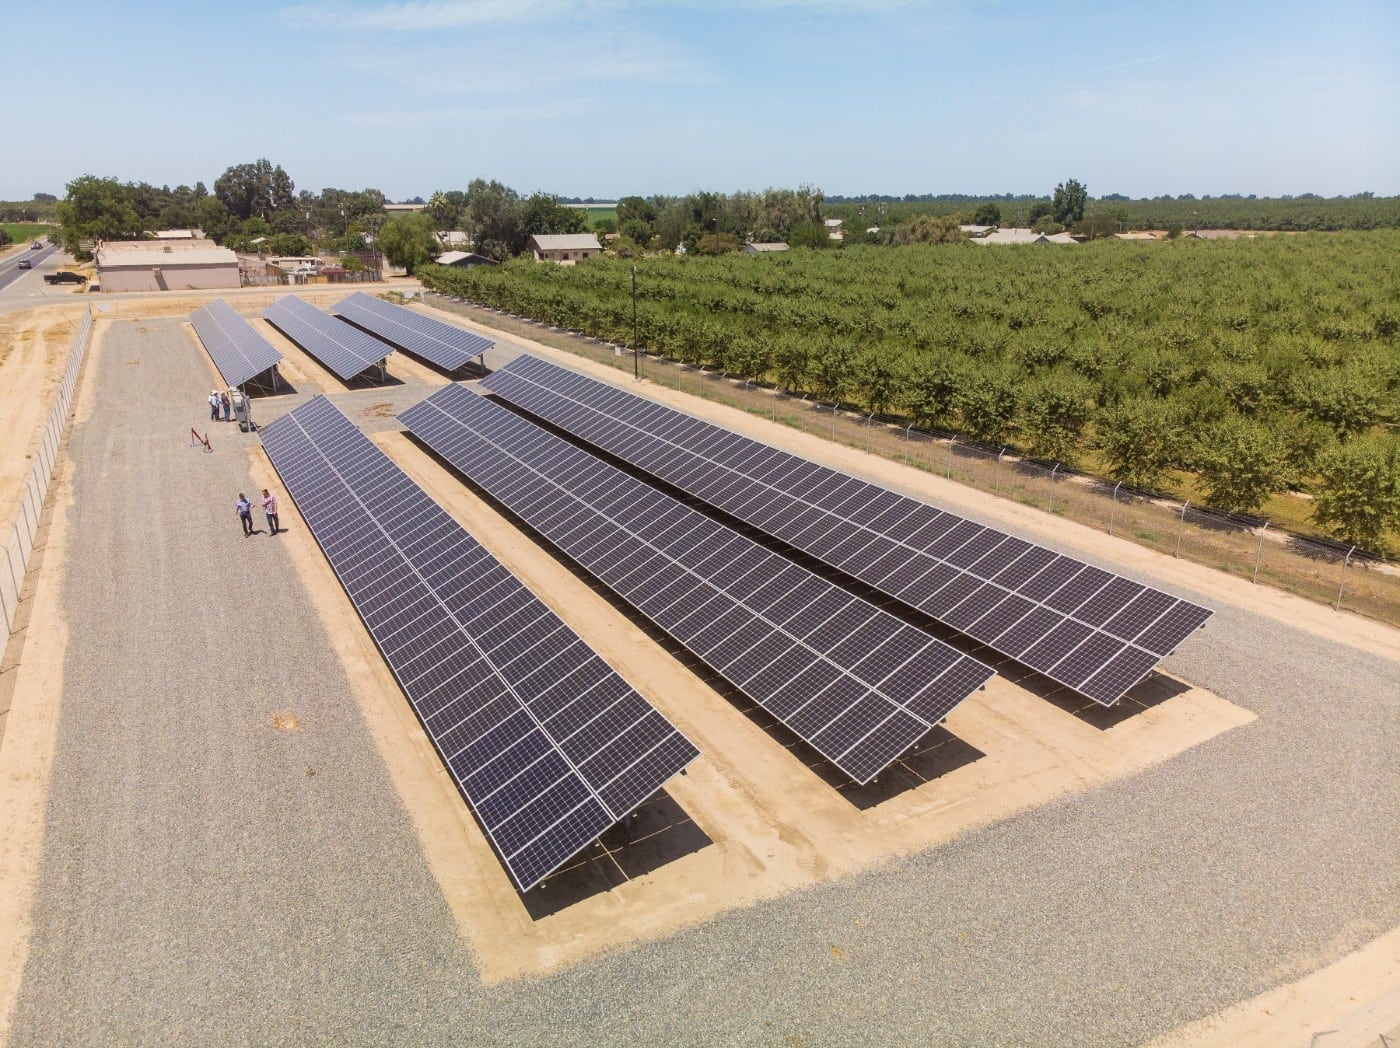 Aerial view of ground-mounted solar panels at Hanse Farms in Hanford surrounded by almond tree crops and farm buildings.